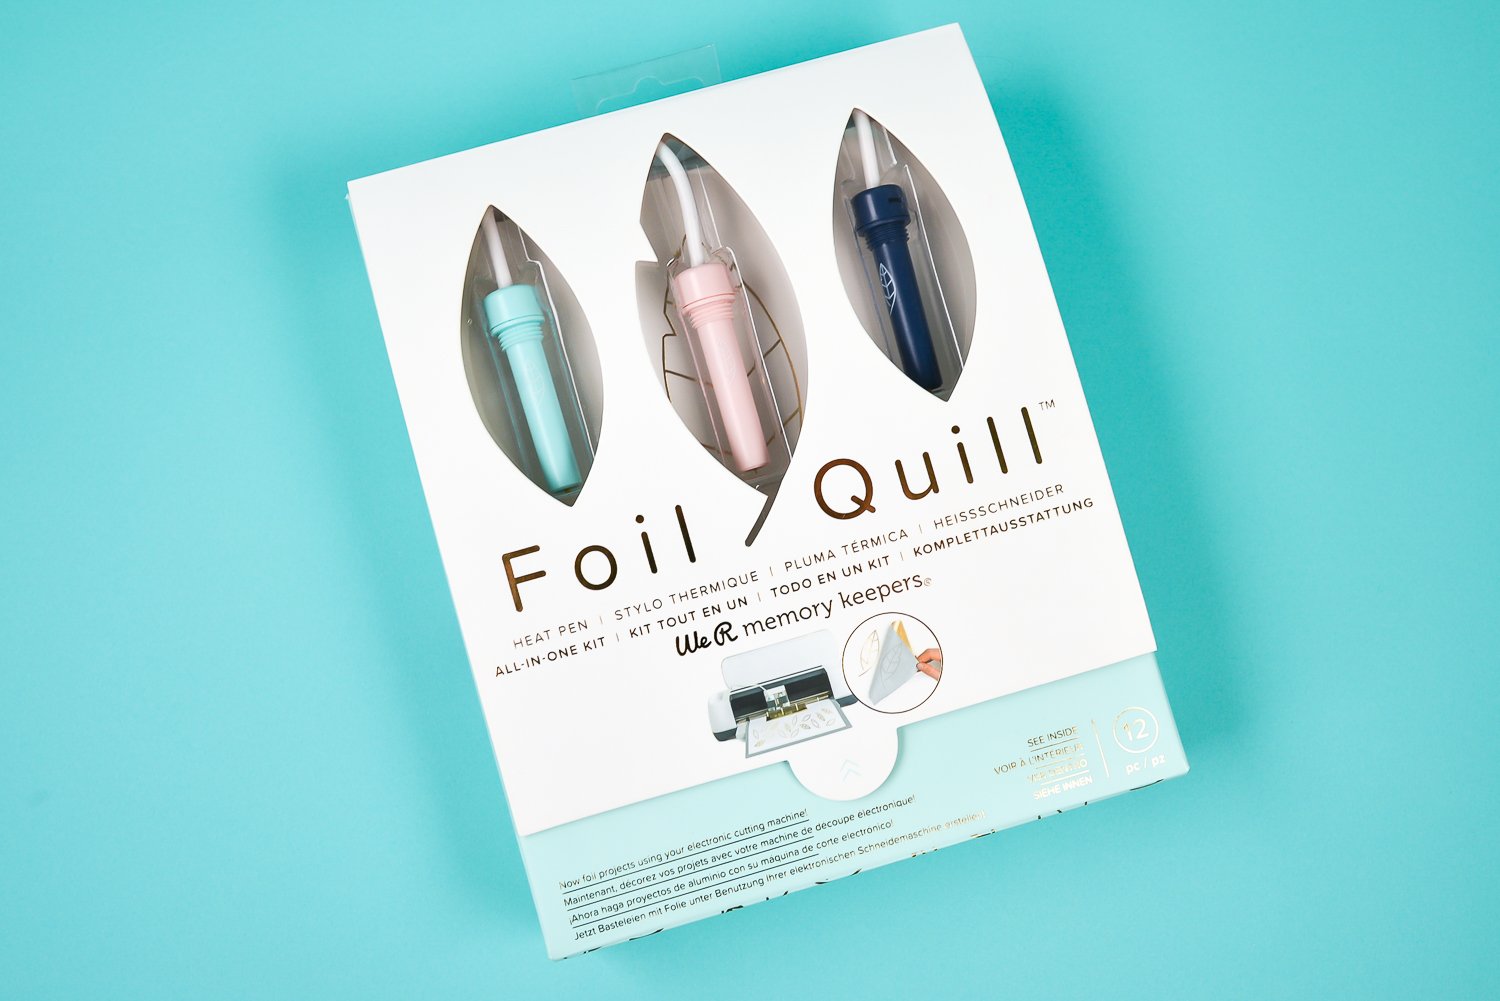 A box that contains three foil quill tools from WeR memory keepers